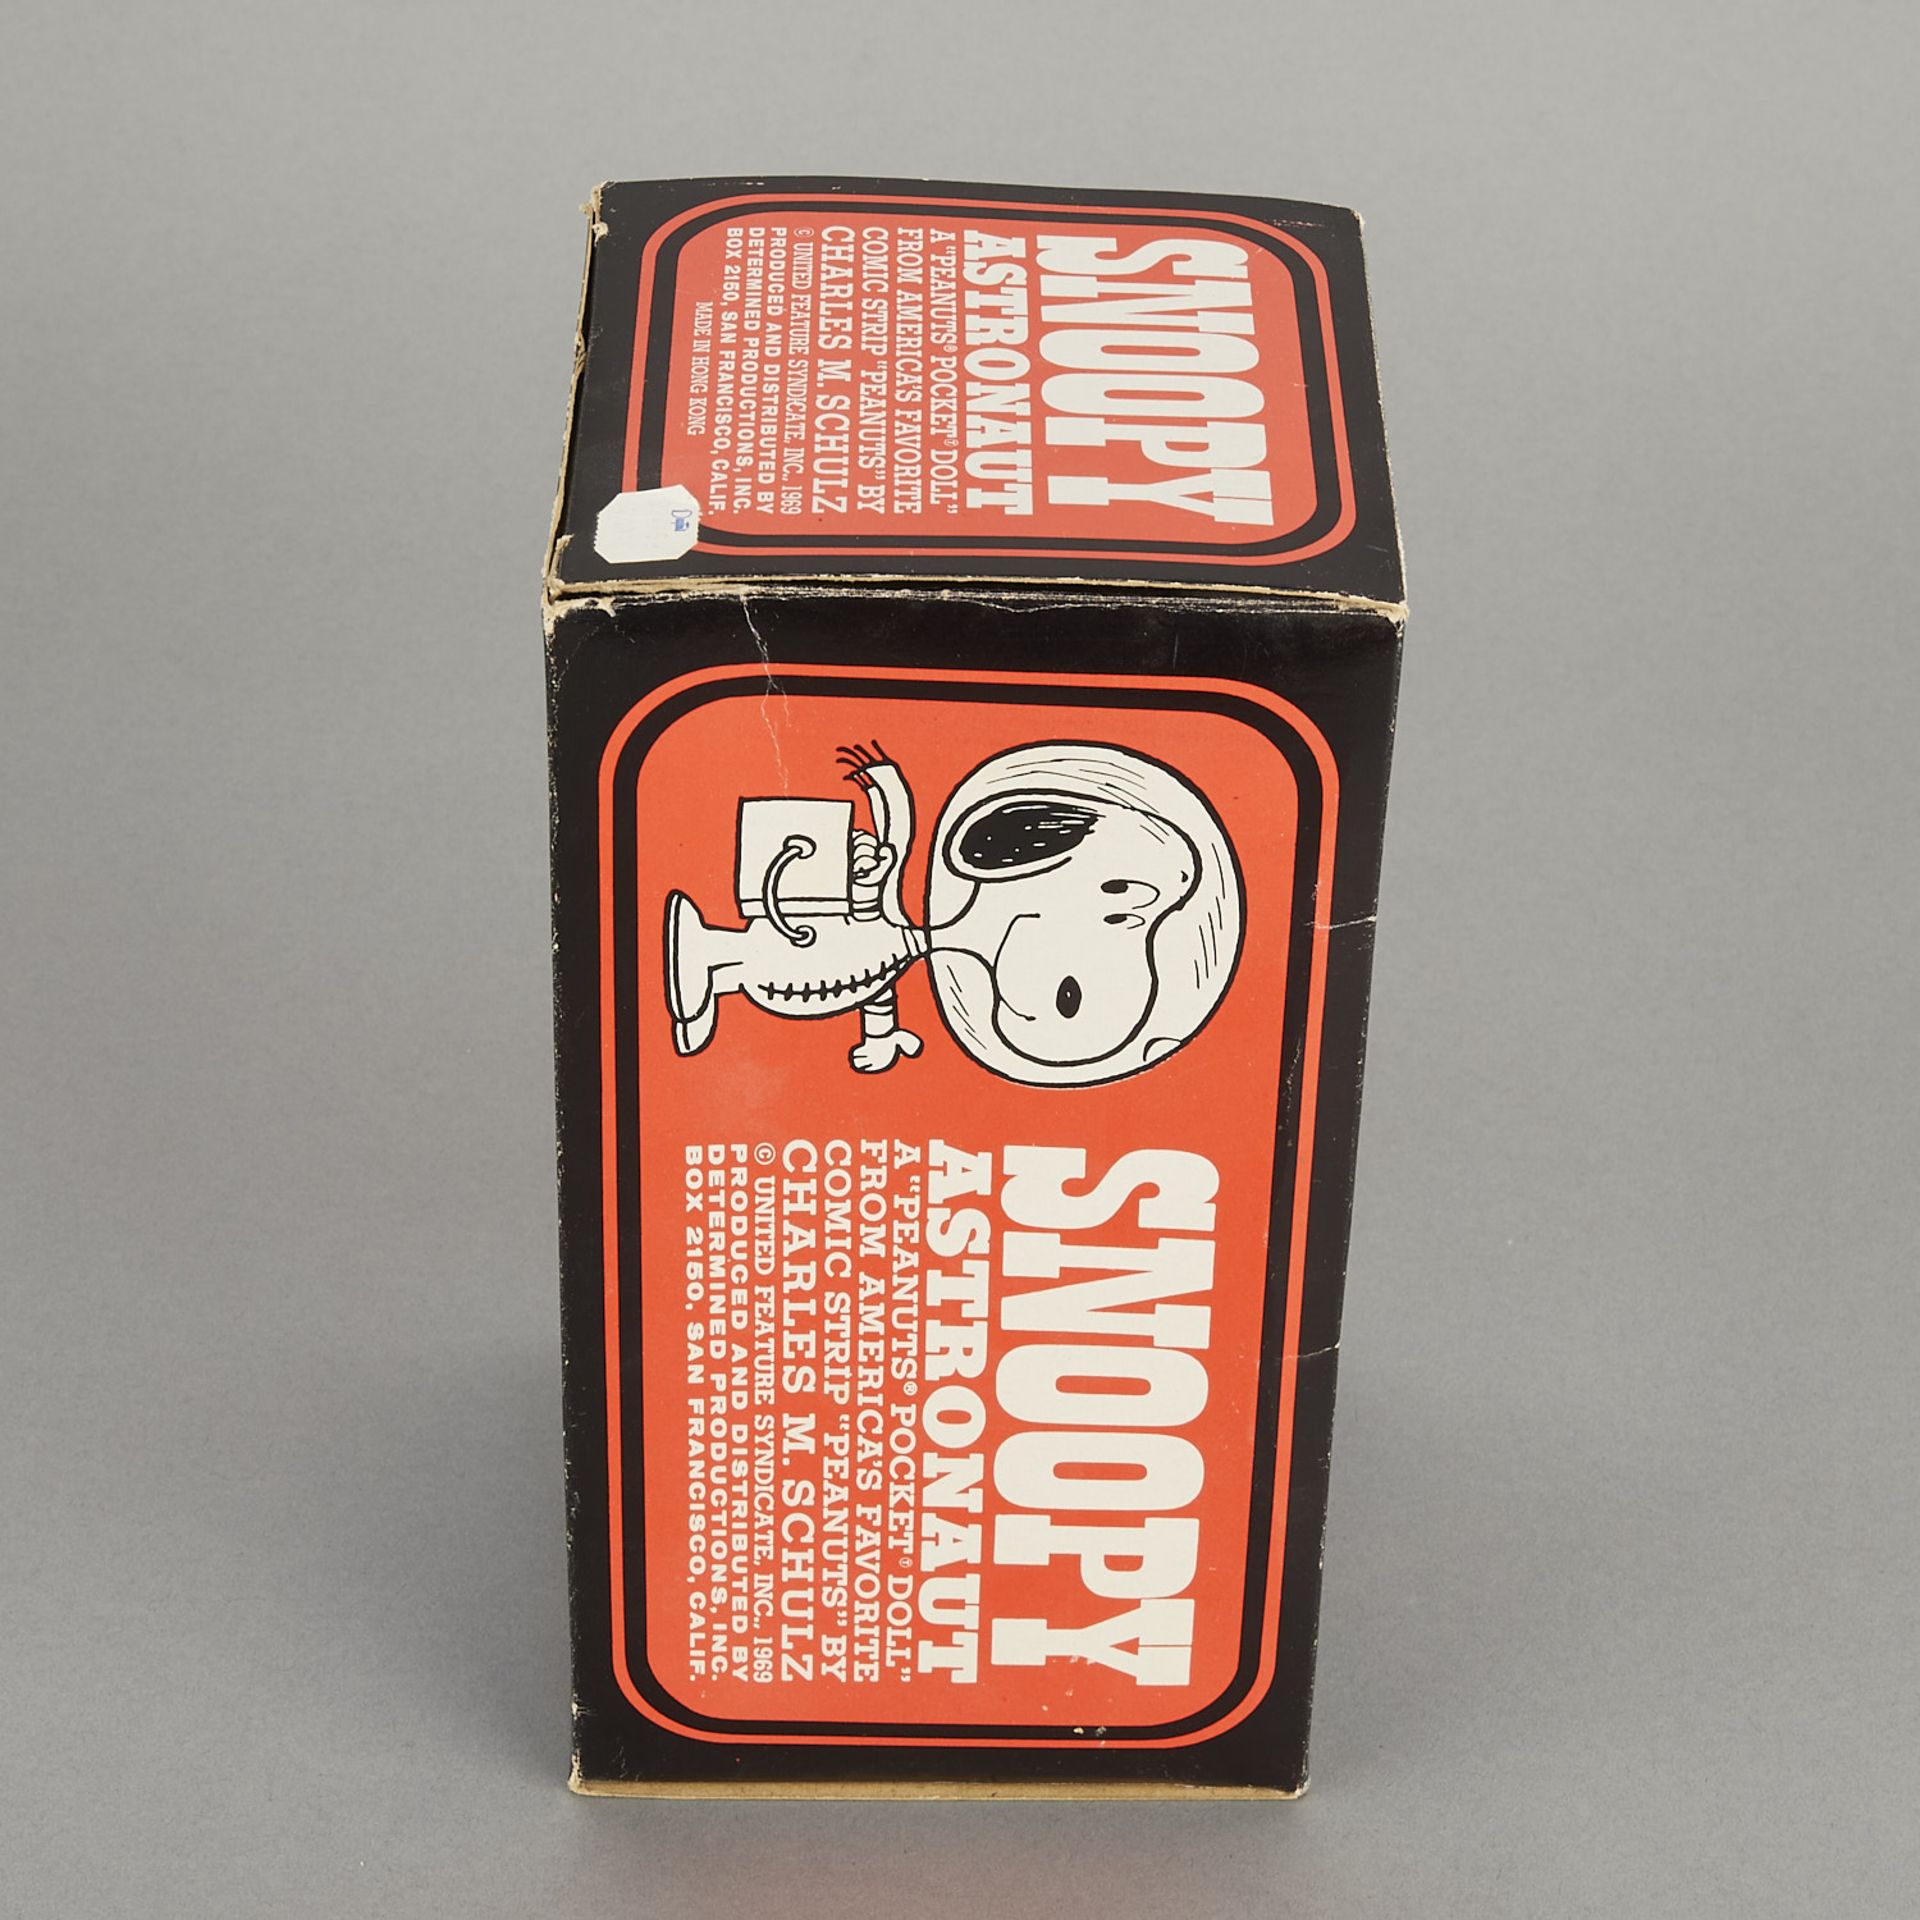 Snoopy Astronaut Pocket Doll with Box - Image 11 of 14